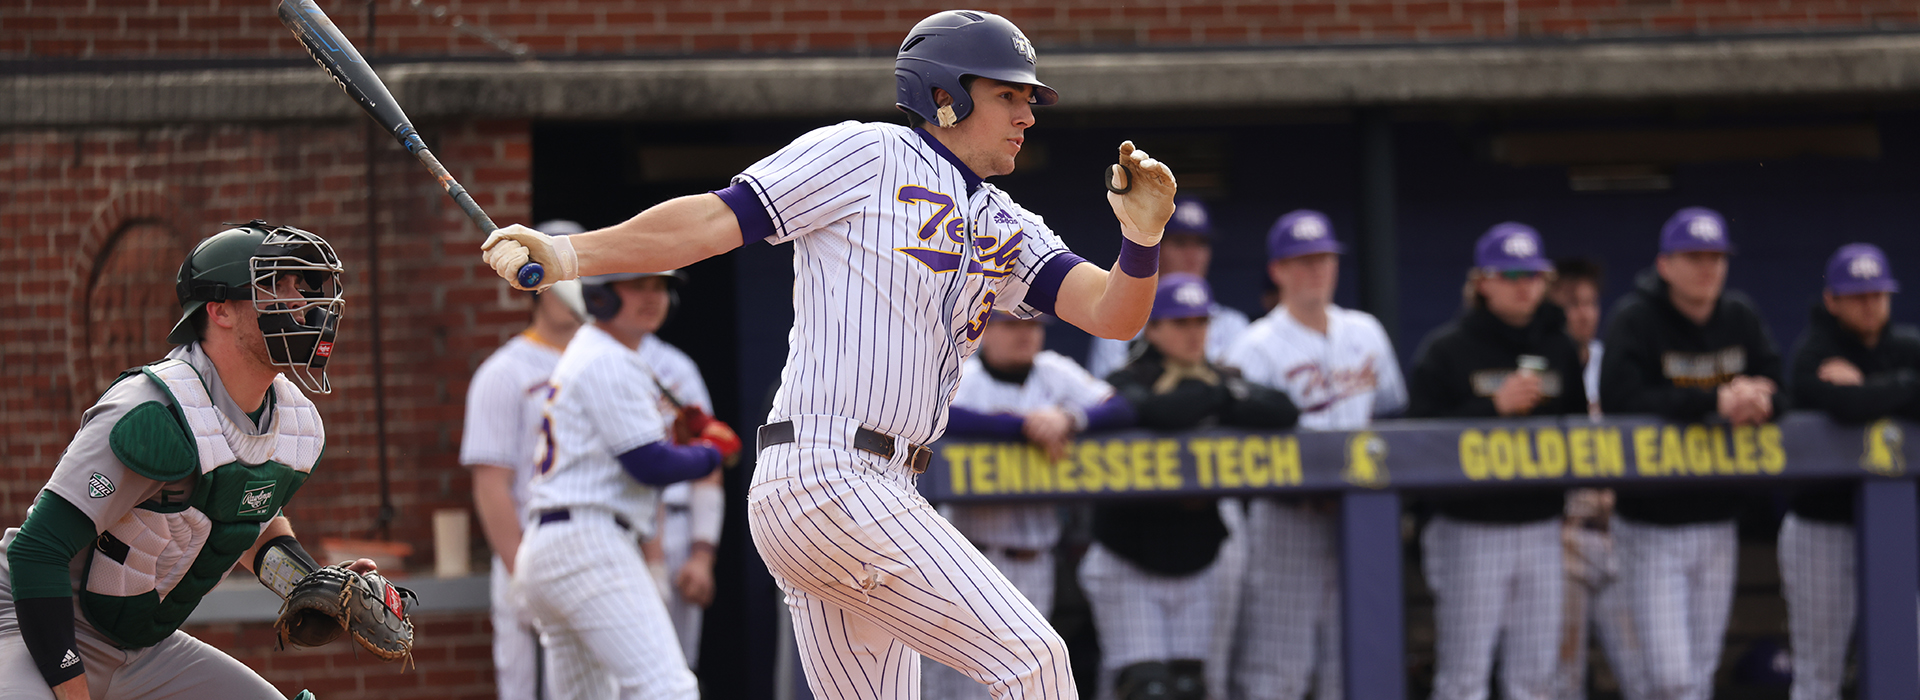 Purple and gold tie 1970 squad for best start since 1955 with 11-8 win at UNA